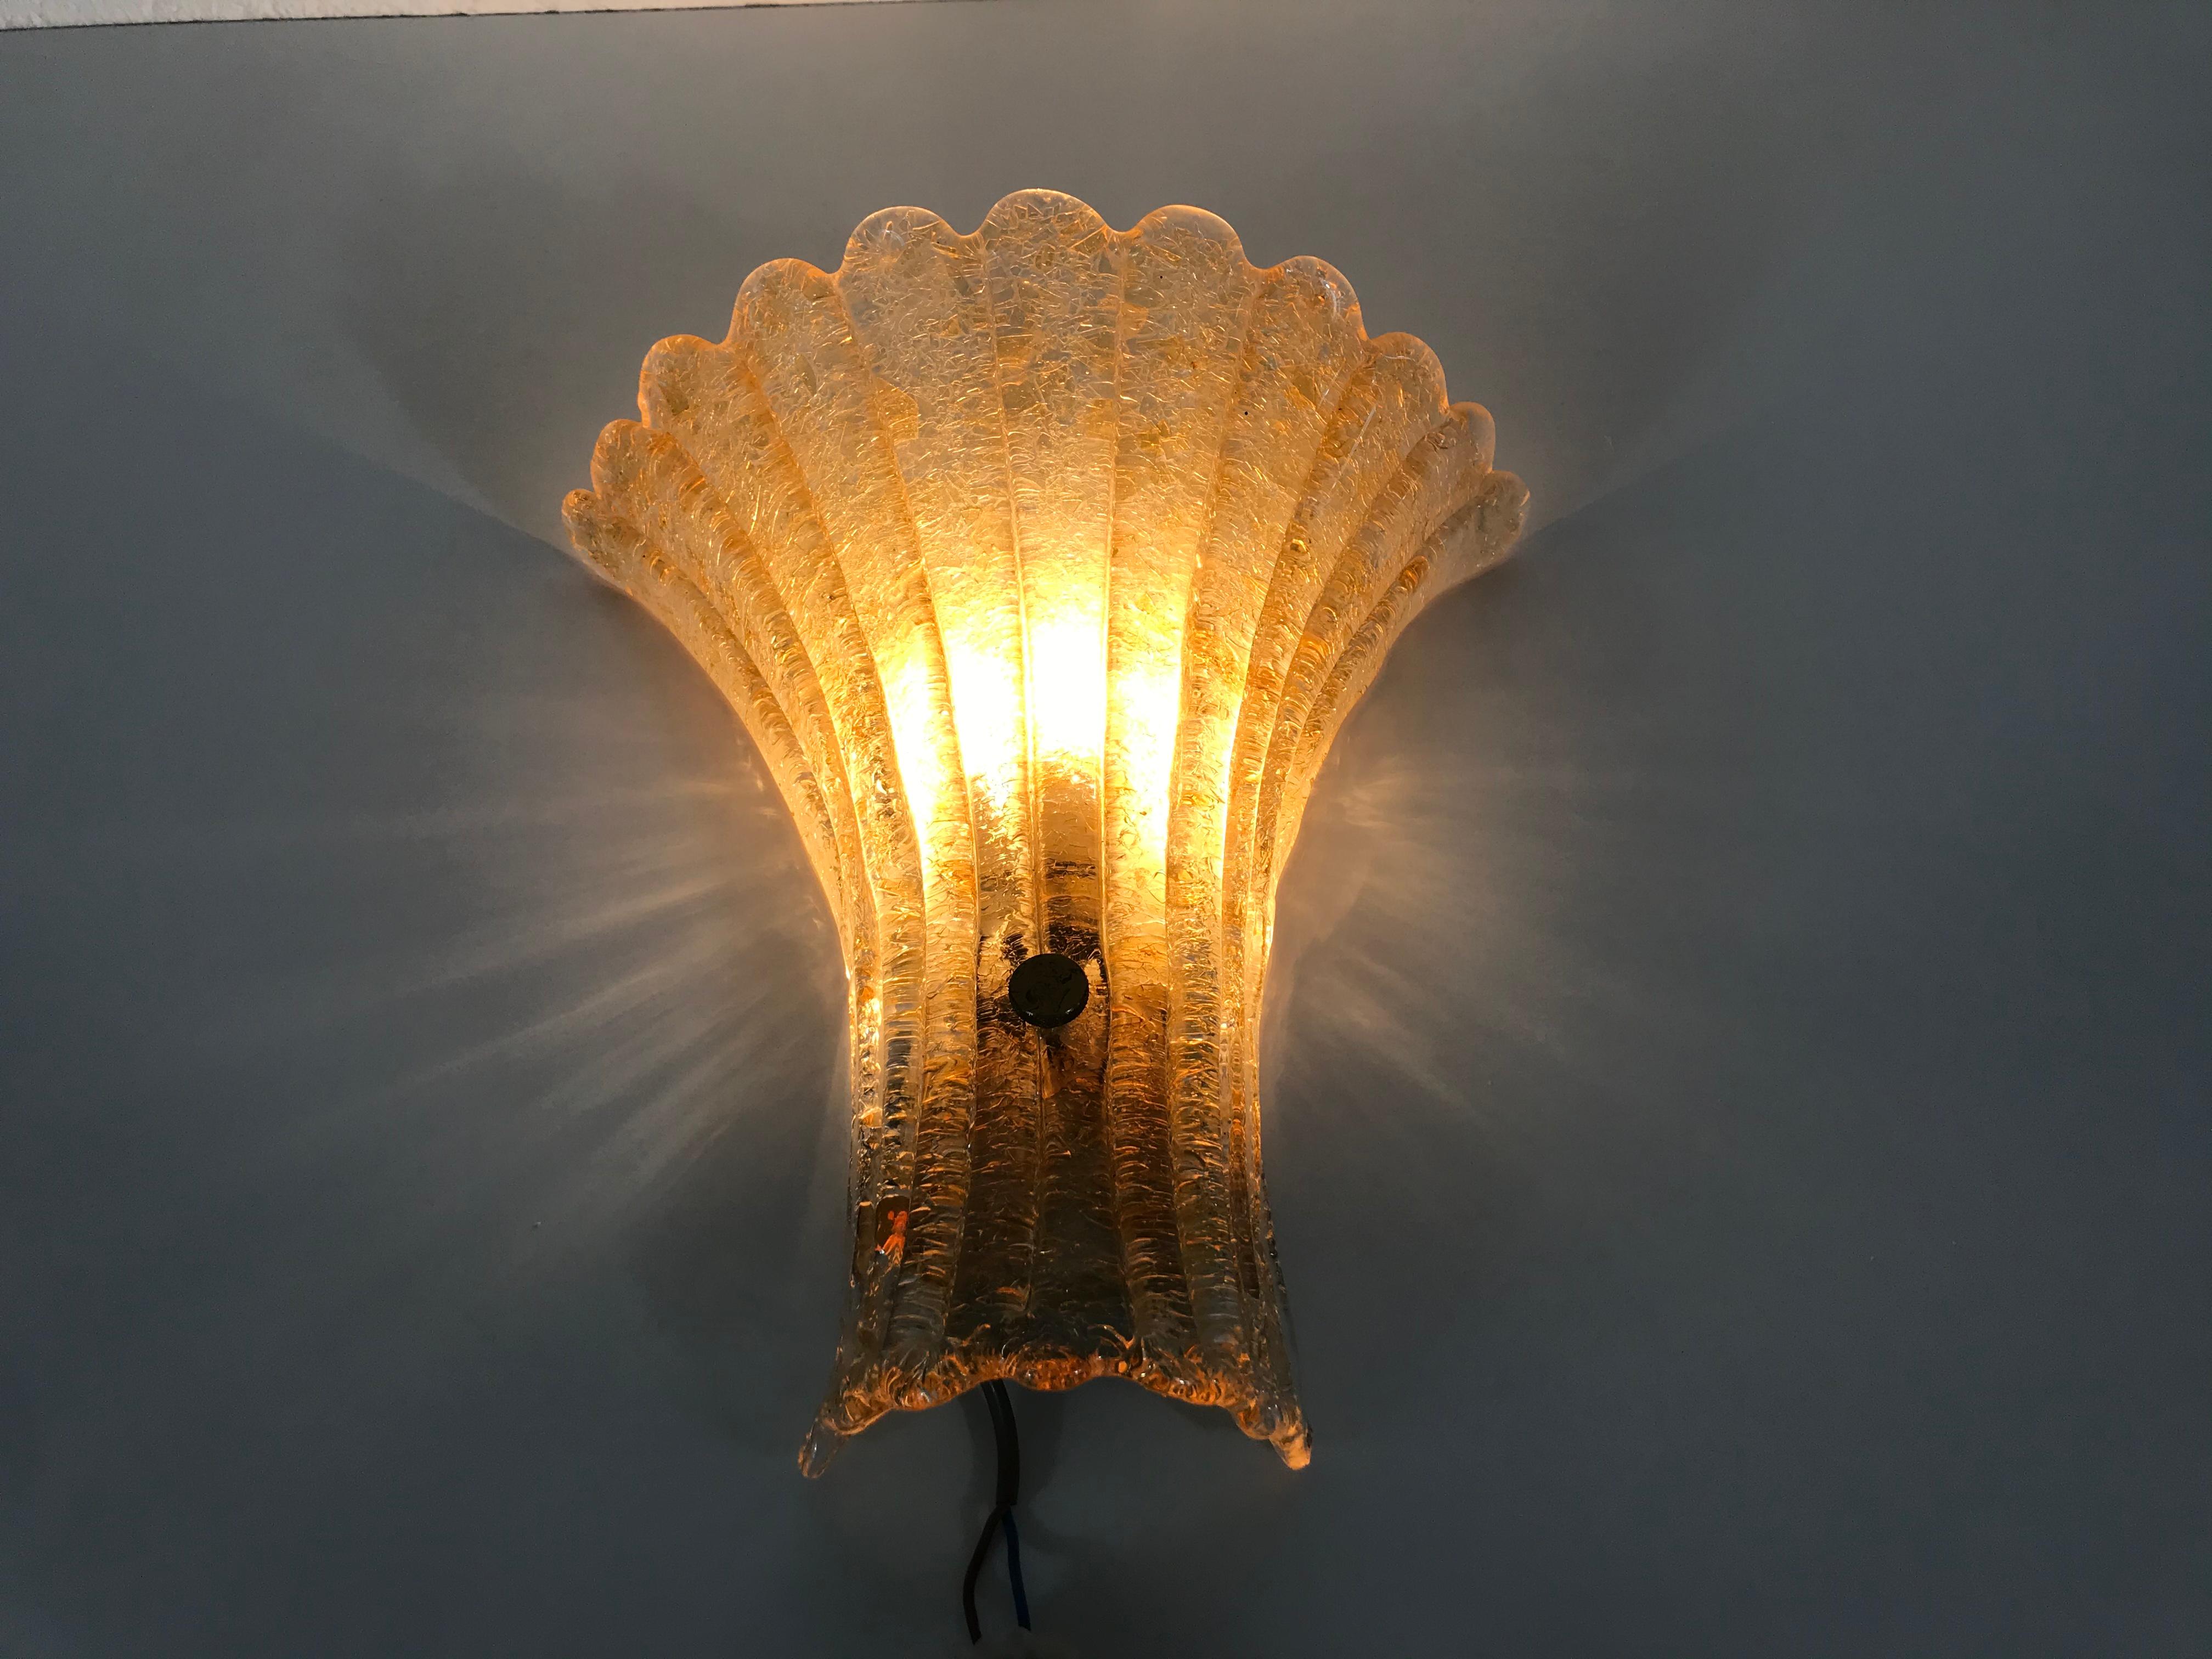 Midcentury beautiful wall light by the German brand Doria made in the 1960s. It has a beautiful shell shape. The unique glass shade is made from murano glass.